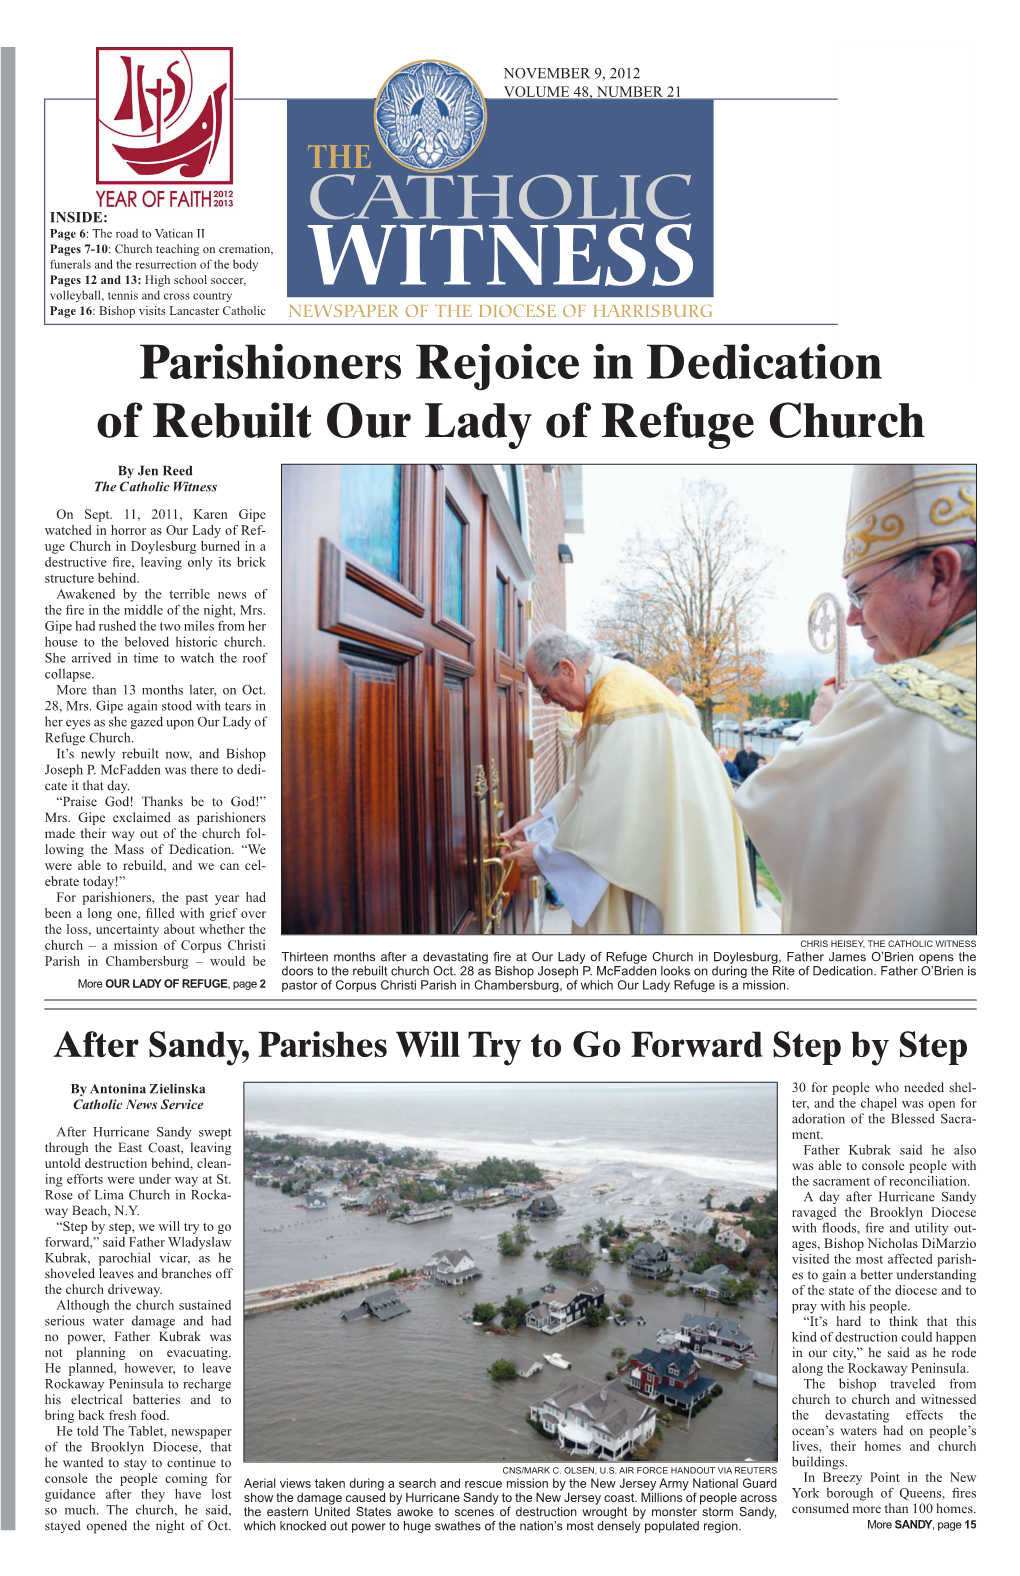 Parishioners Rejoice in Dedication of Rebuilt Our Lady of Refuge Church